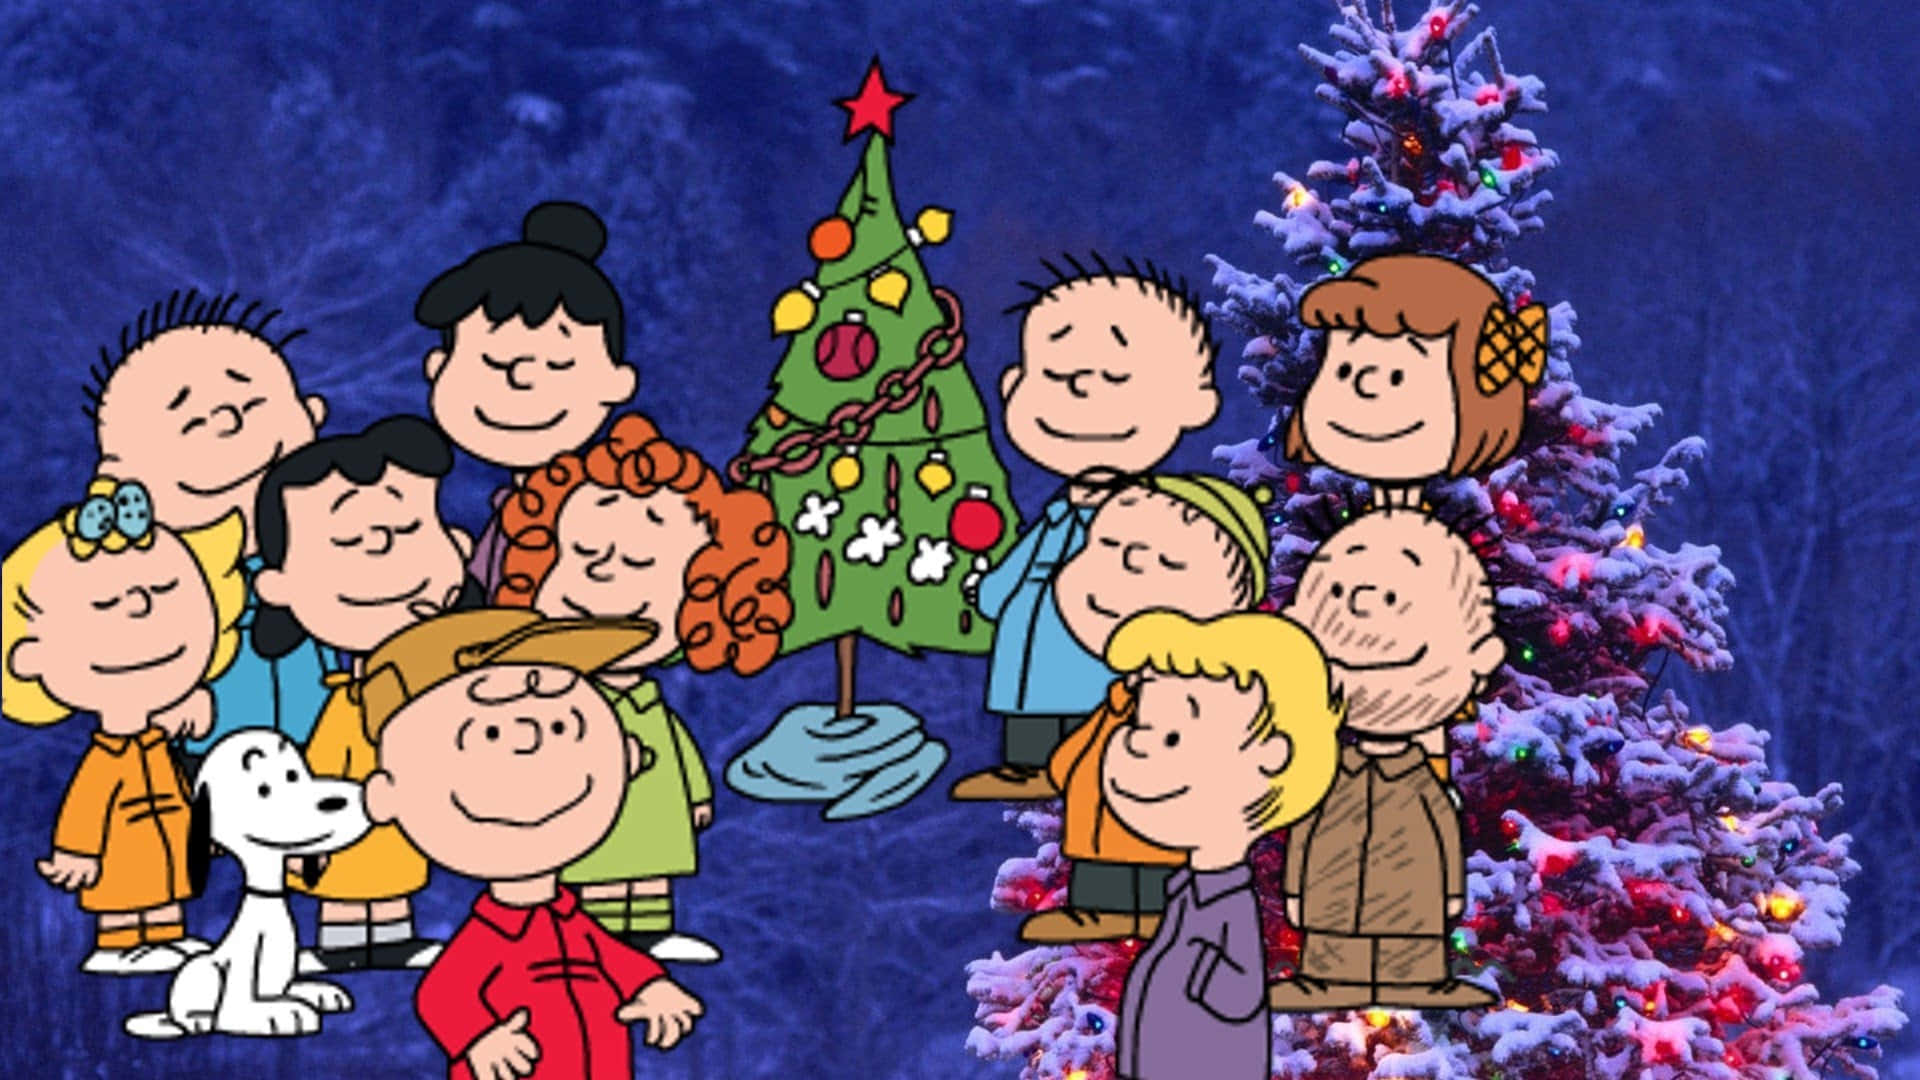 Charlie Brown And The Gang Enjoying A Christmas Eve Complete With A Tree And Presents!